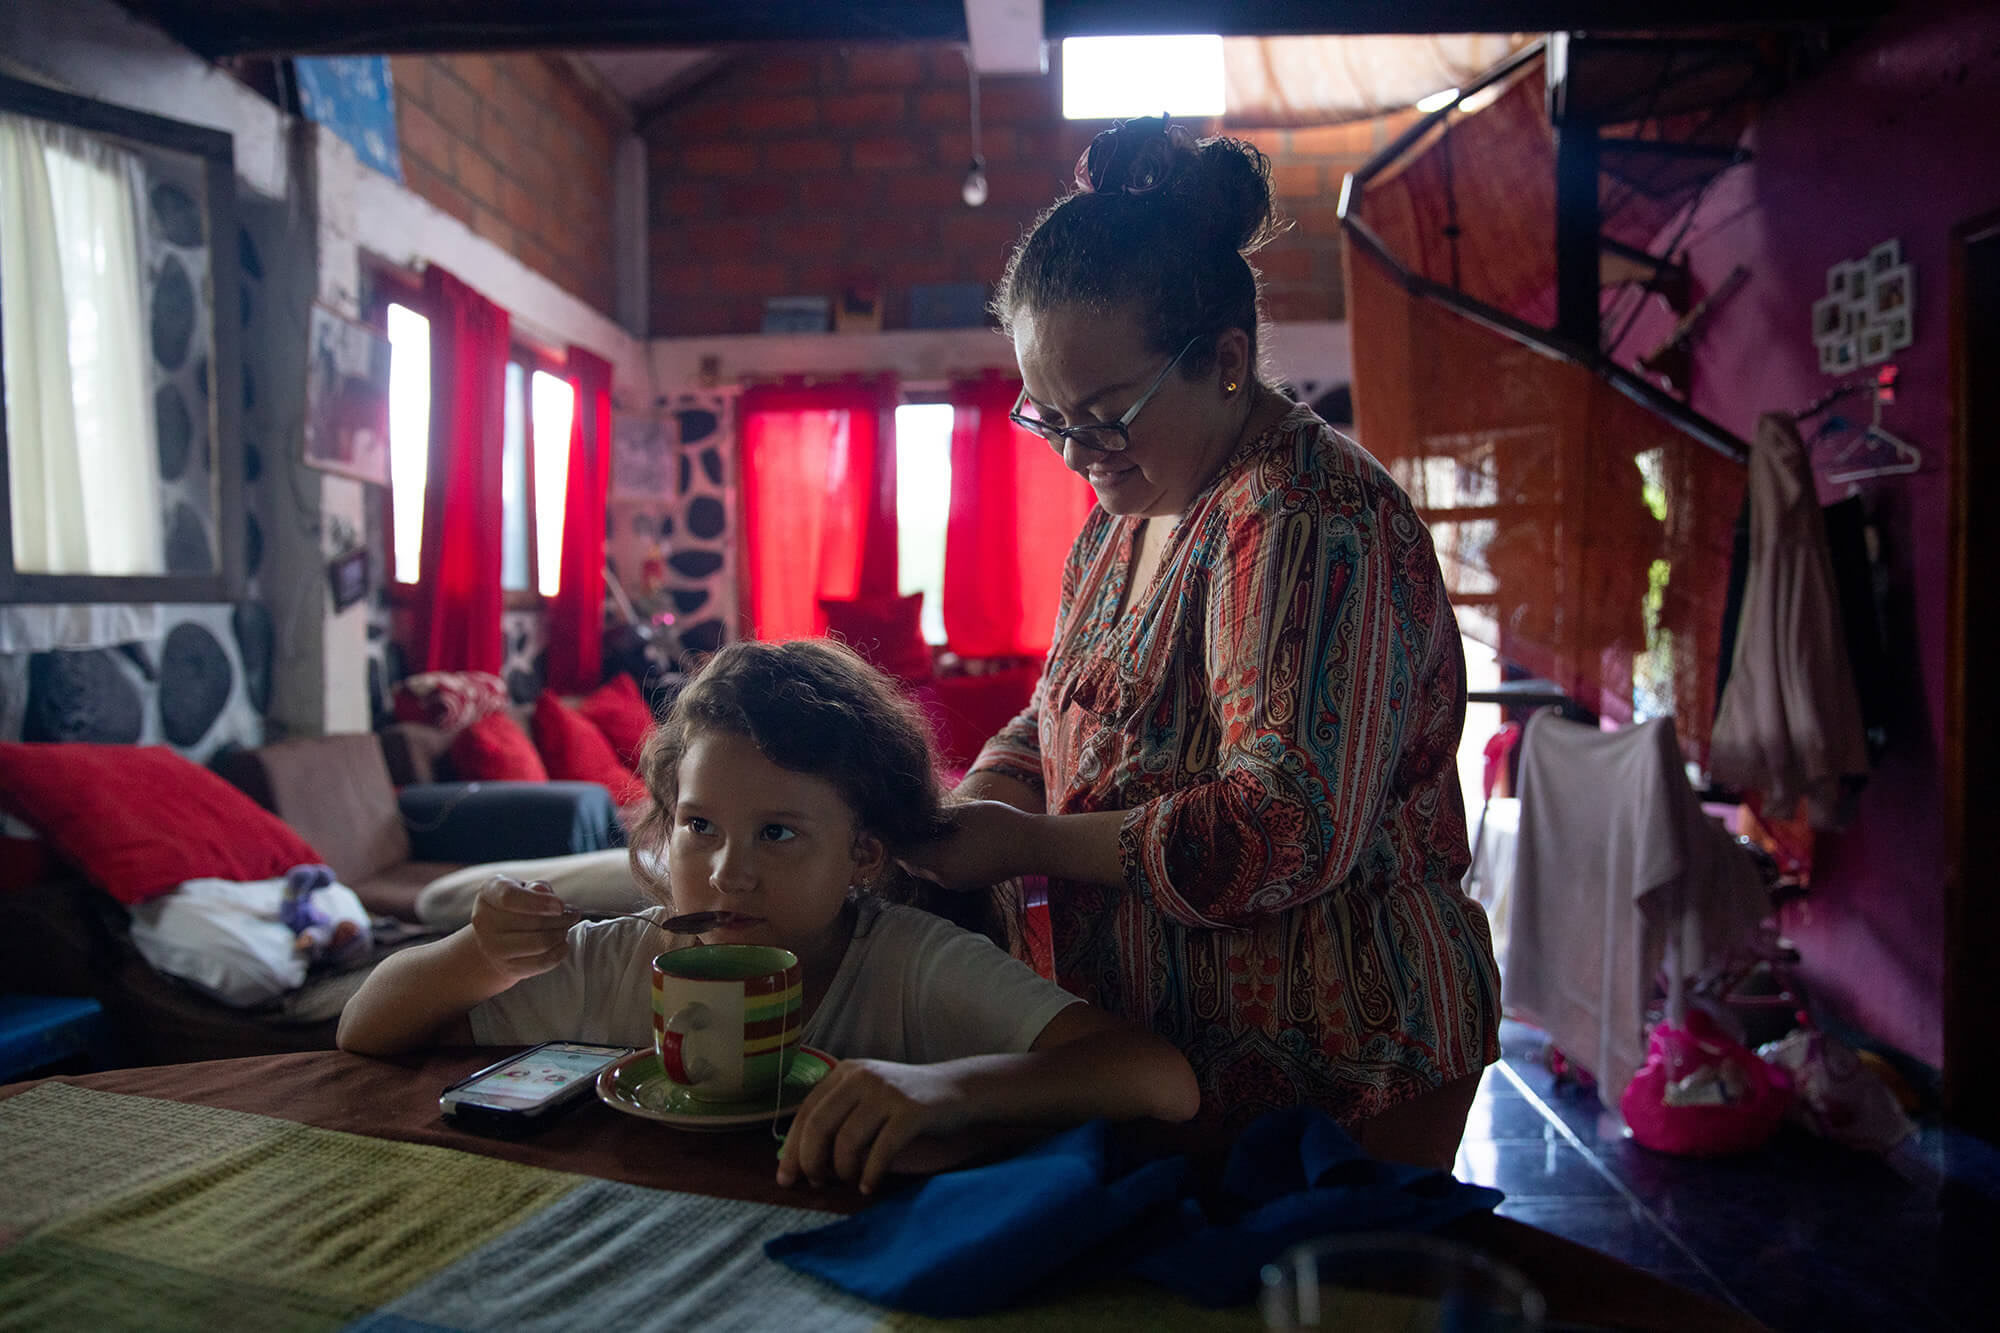 Alava, right, works her hands through daughter Amaya’s hair (left). Both are inside Alava’s home; there are red curtains in the background and a spiral staircase to Alava’s right. Amaya is sitting and sipping tea from a spoon. She wears a white shirt. Alava is wearing a red, patterned shirt and is standing.